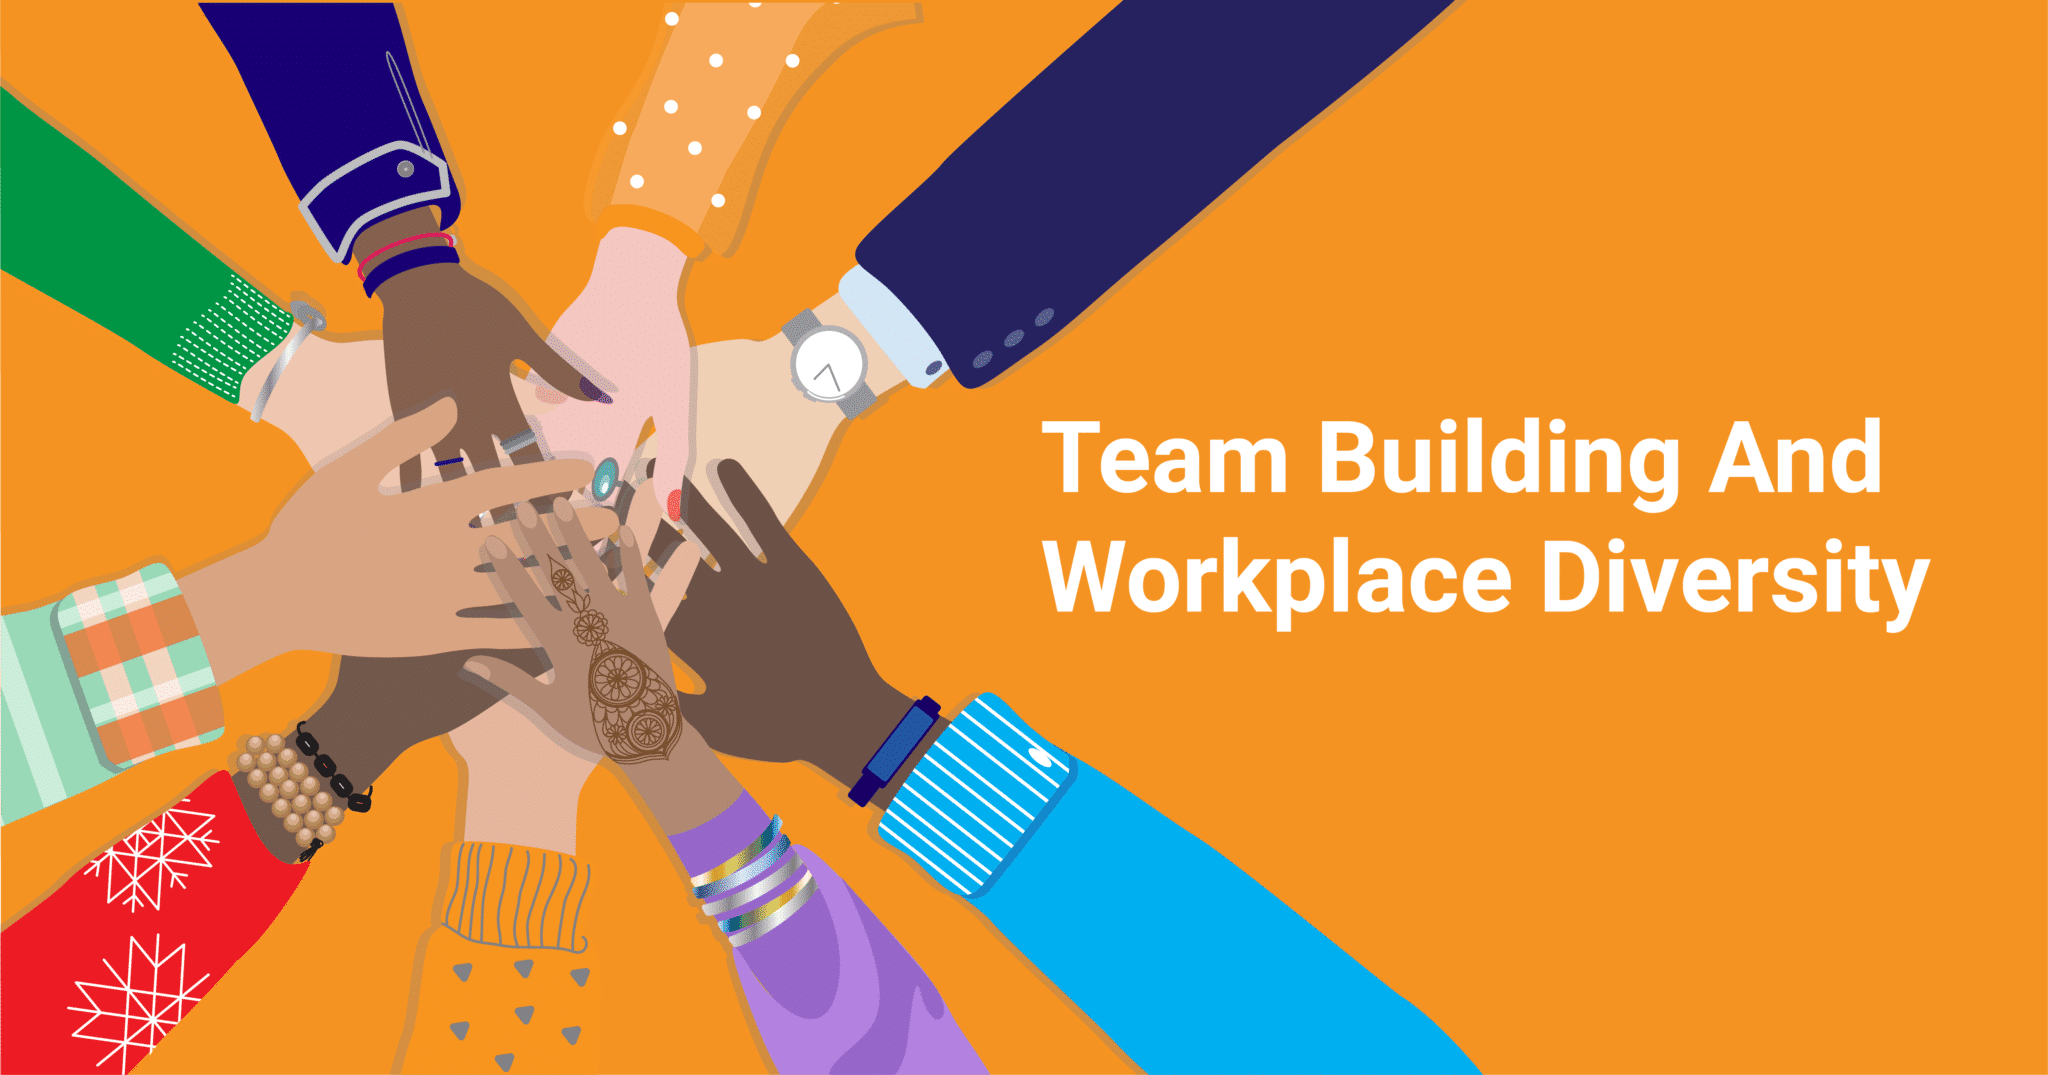 Team Building and Workplace diversity